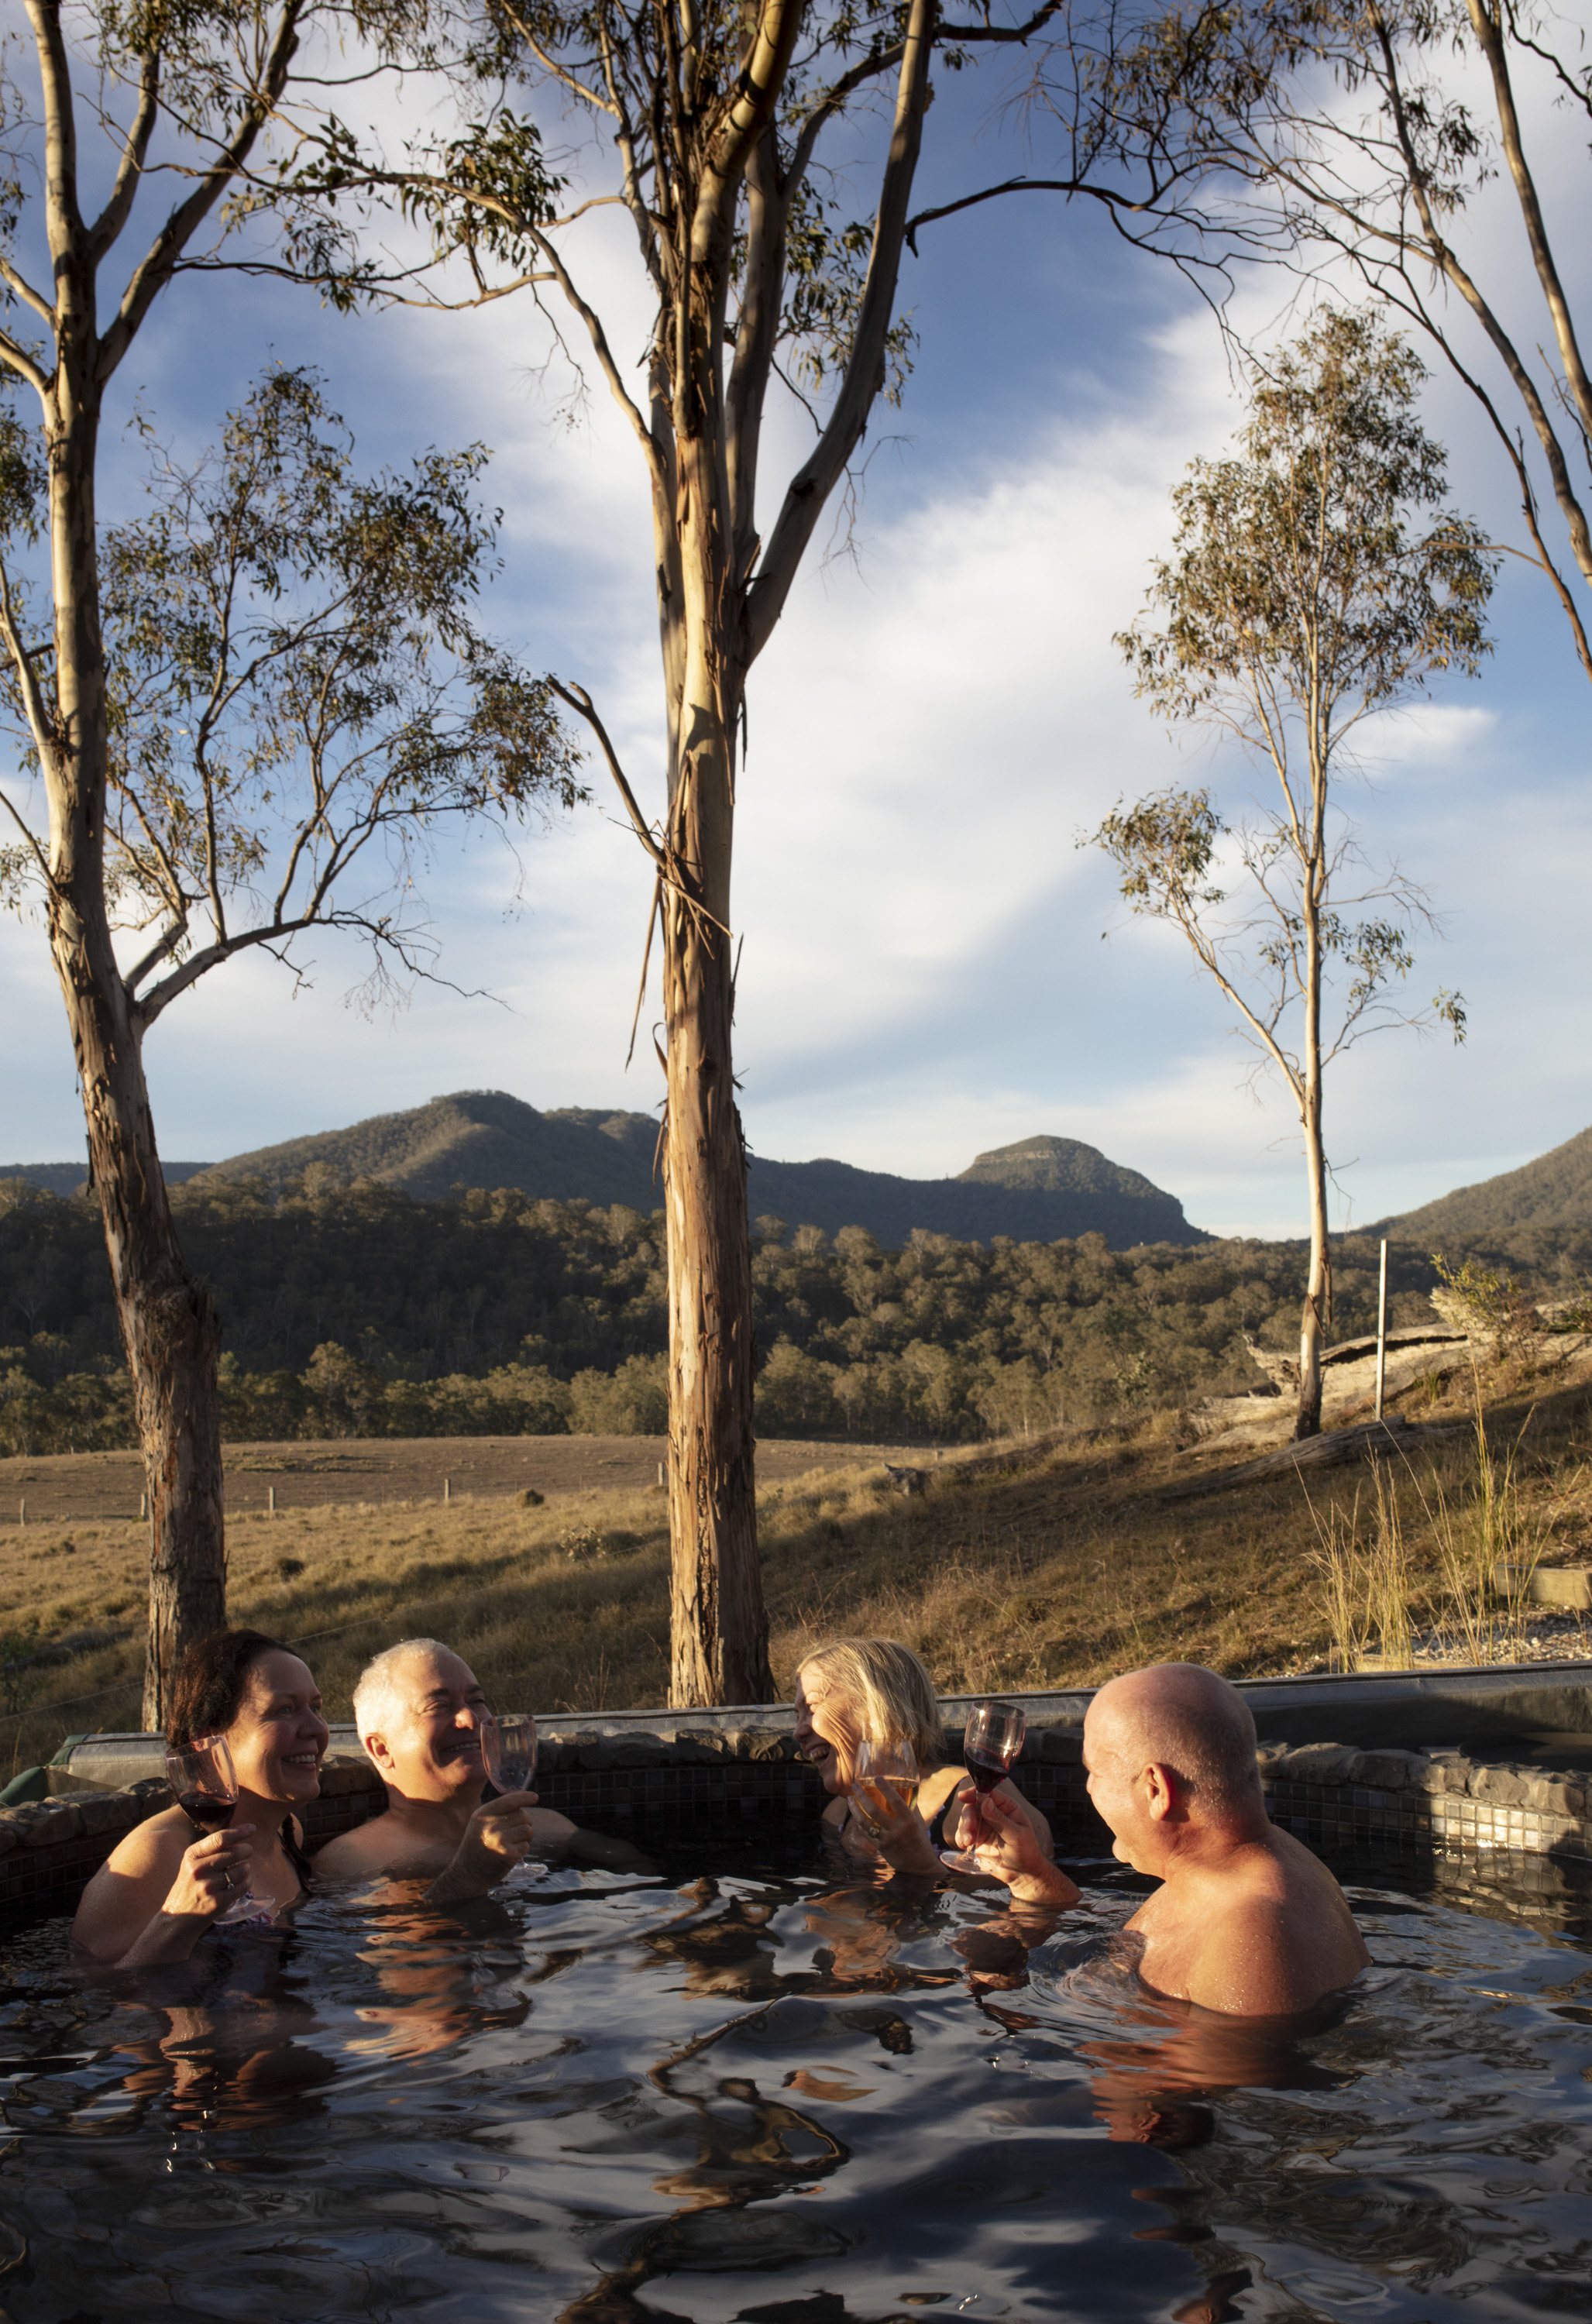  Qantas Magazine/Scenic Rim Walk.
Walkers arriving at Spicers Canopy. Hot tub and drinks after a full days walking. 
Mount Mitchell in the background where the walkers have come from.Photography : Russell Shakespeare 